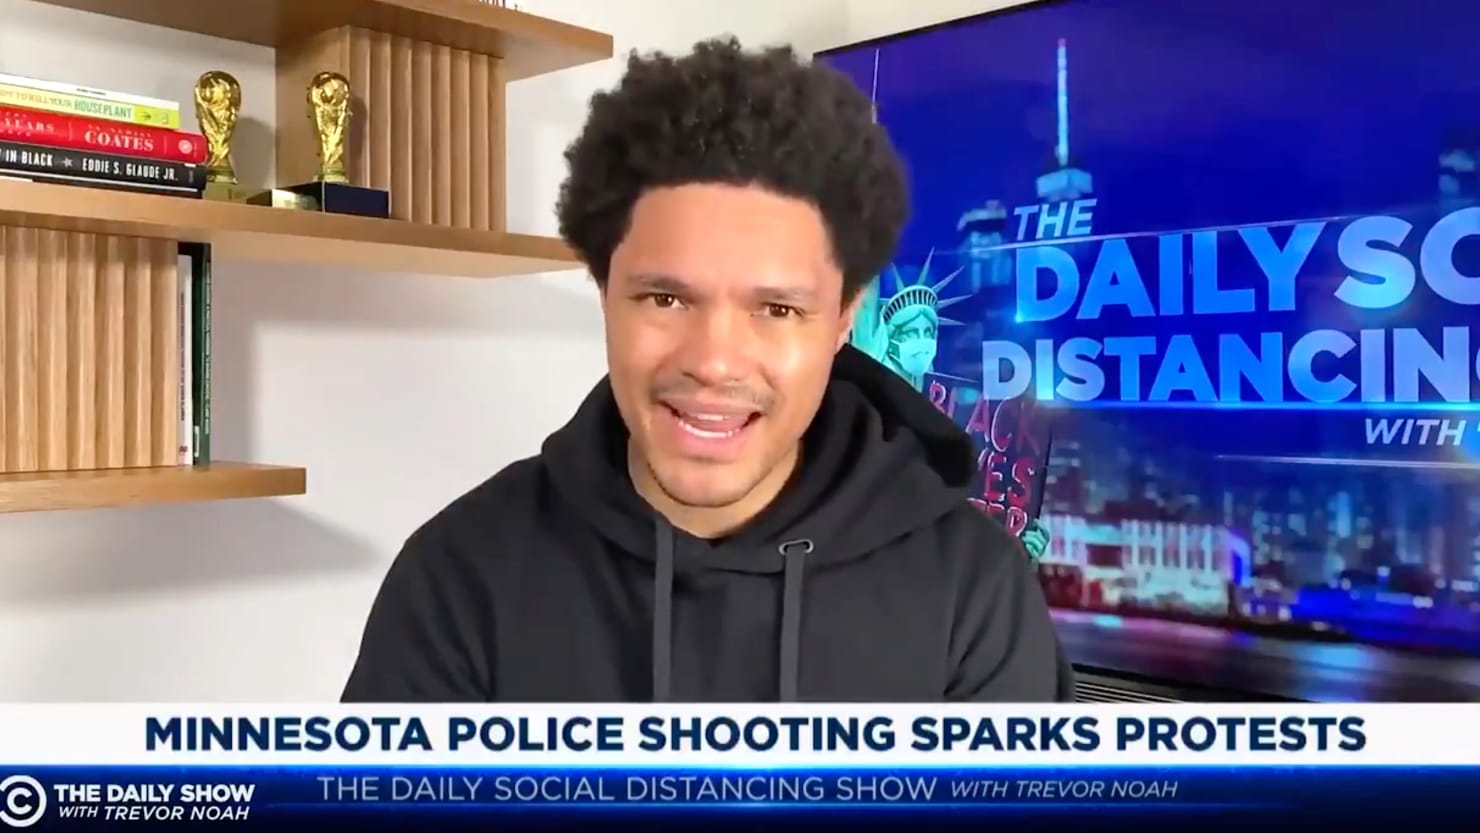 Trevor Noah from ‘Daily Show’ raves about the murder of Daunte Wright by the police